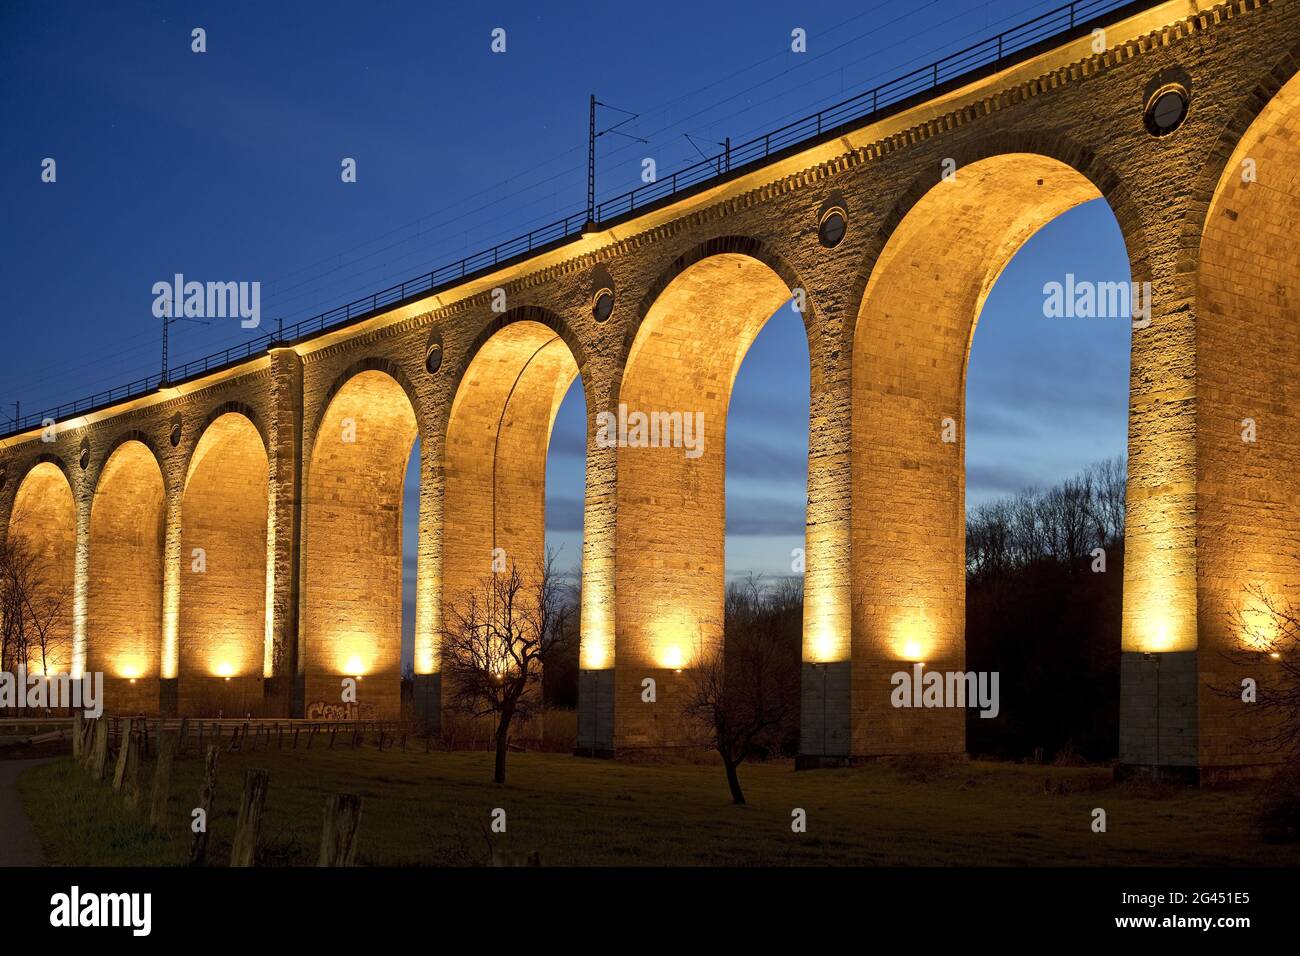 Illuminated viaduct in the evening, largest sand-lime stone bridge in Europe, Altenbeken, Germany Stock Photo